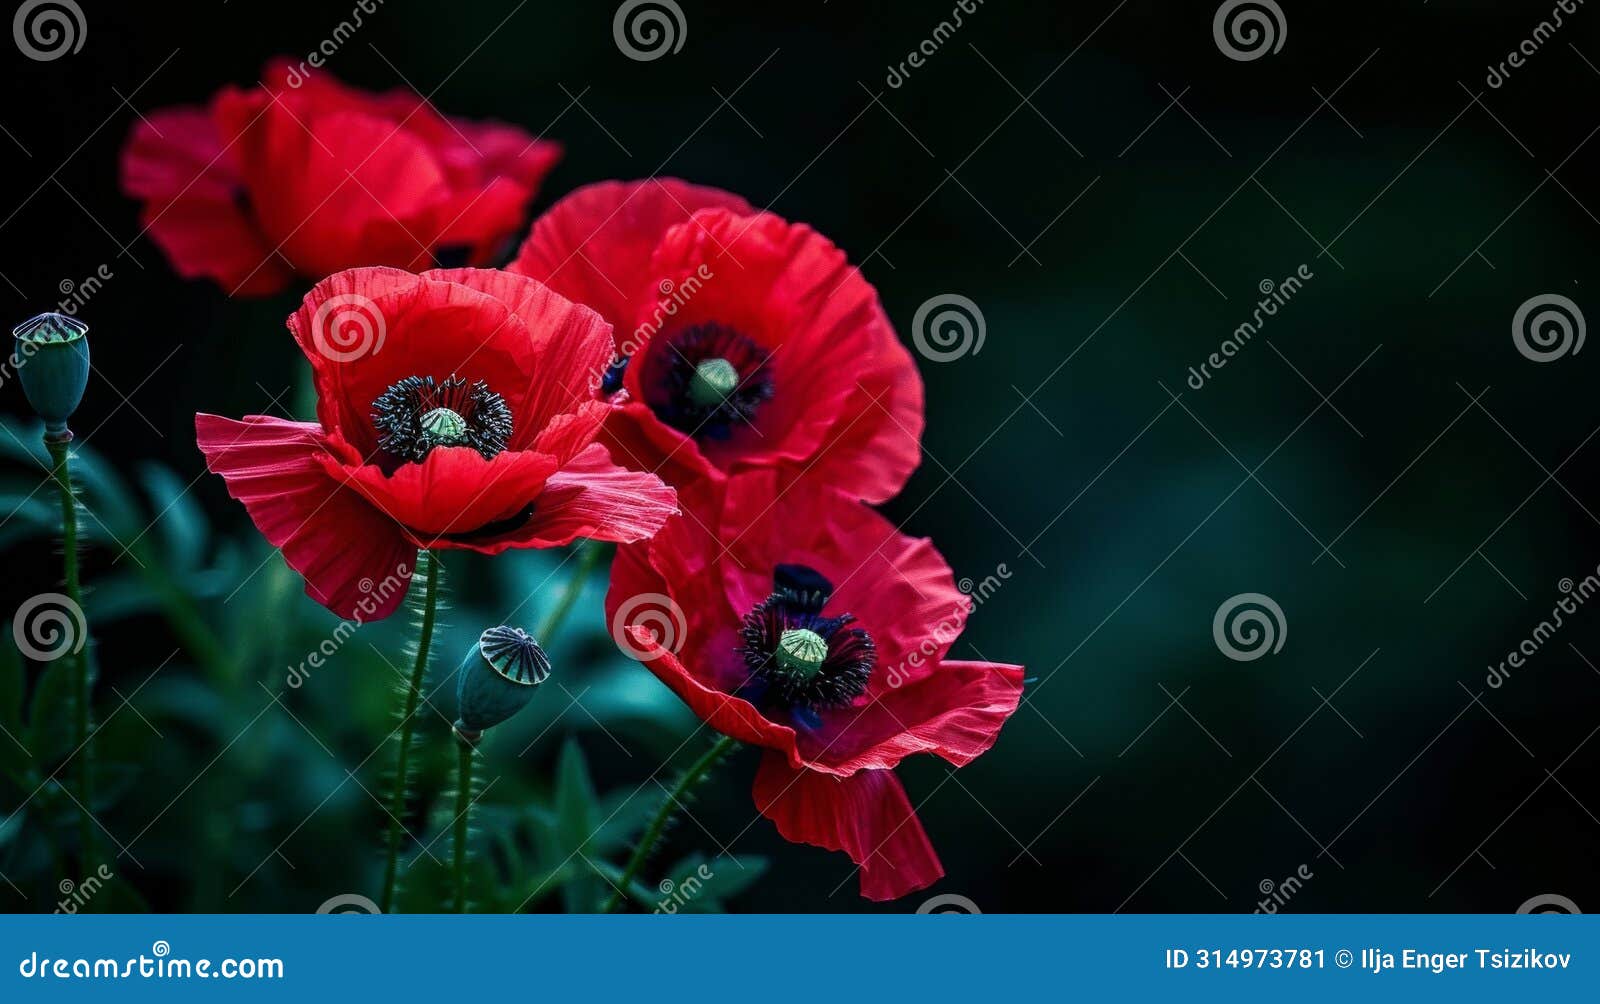 ic red poppies on dark background significance for remembrance day, armistice day, anzac day